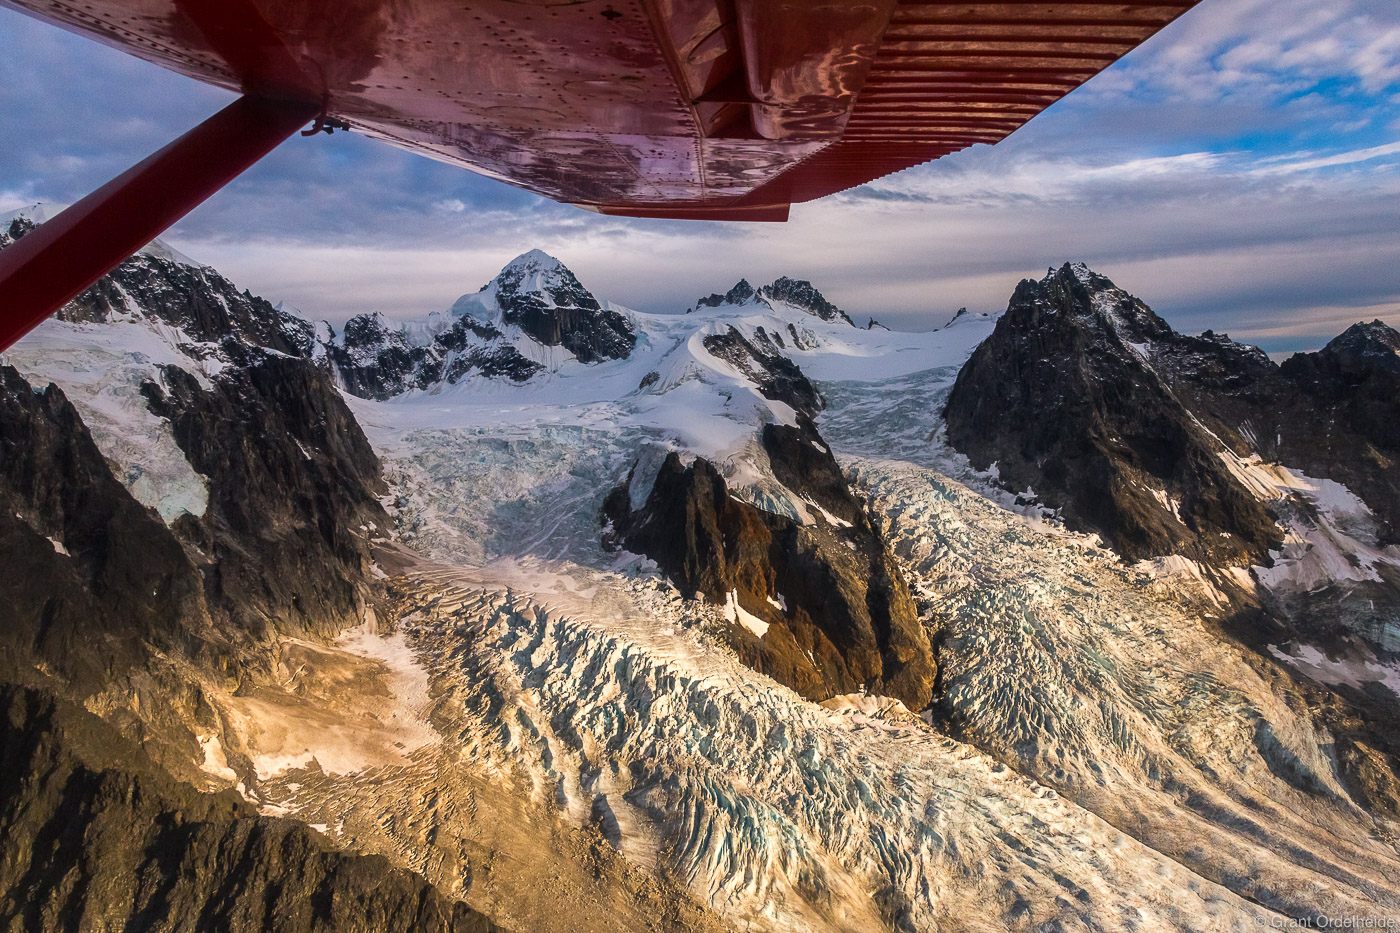 Flying over an area known as "Little Switzerland" in Alaska's Denali National Park.